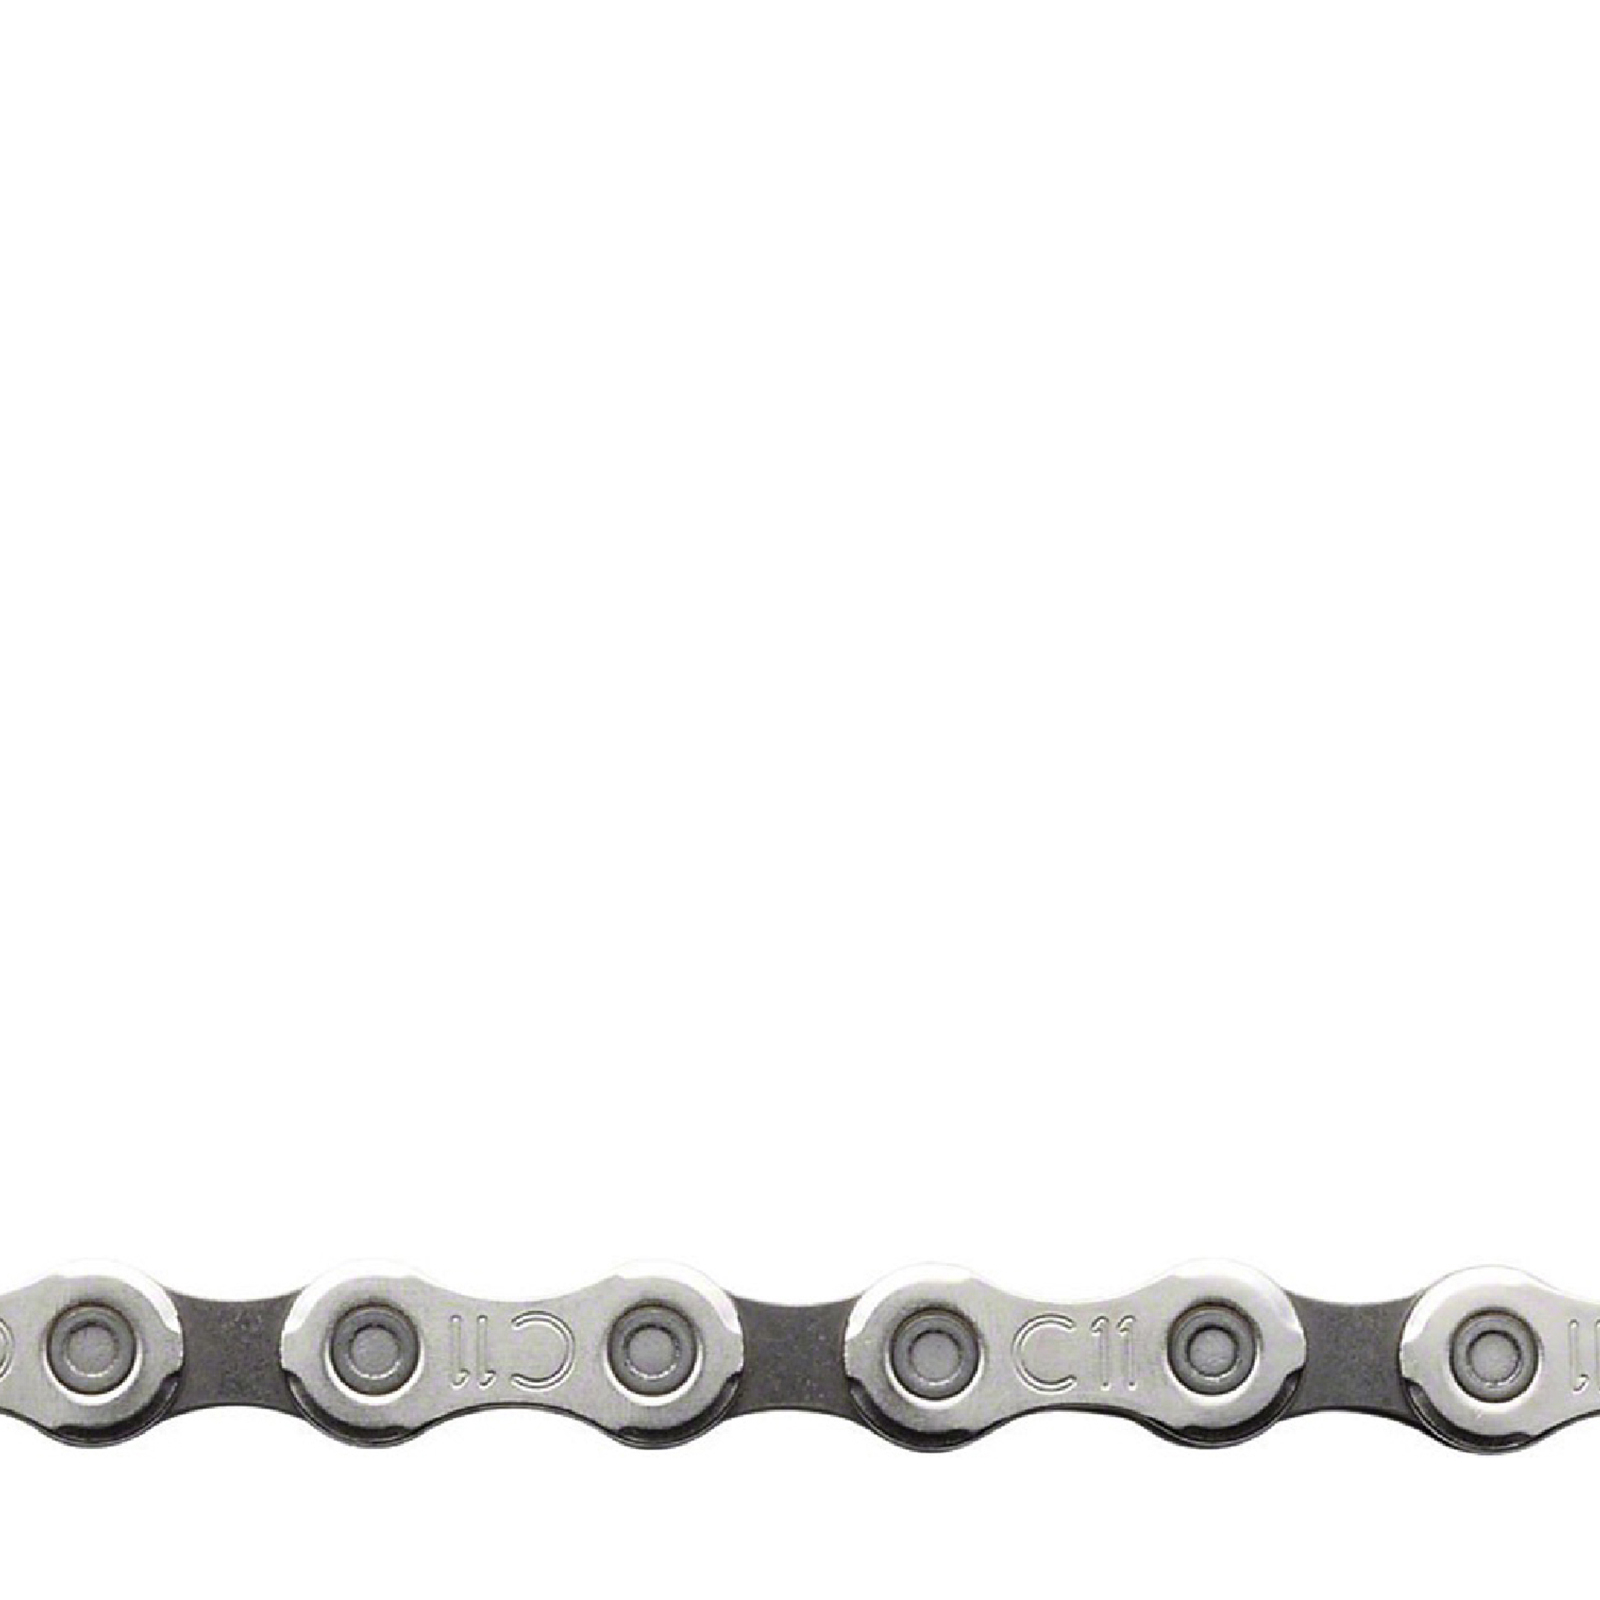 chain link 11 speed